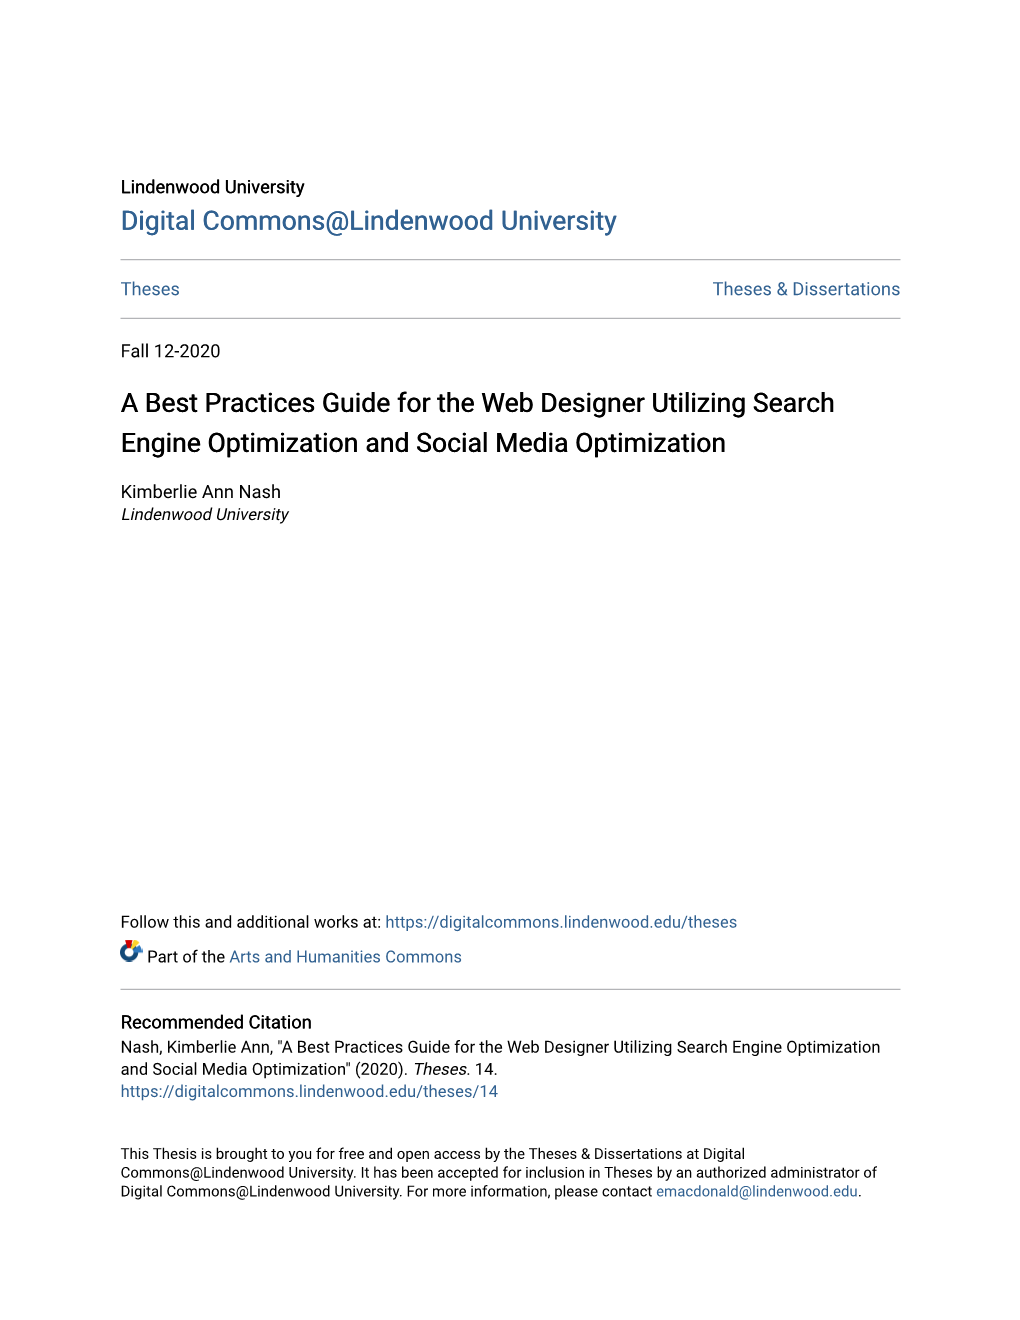 A Best Practices Guide for the Web Designer Utilizing Search Engine Optimization and Social Media Optimization